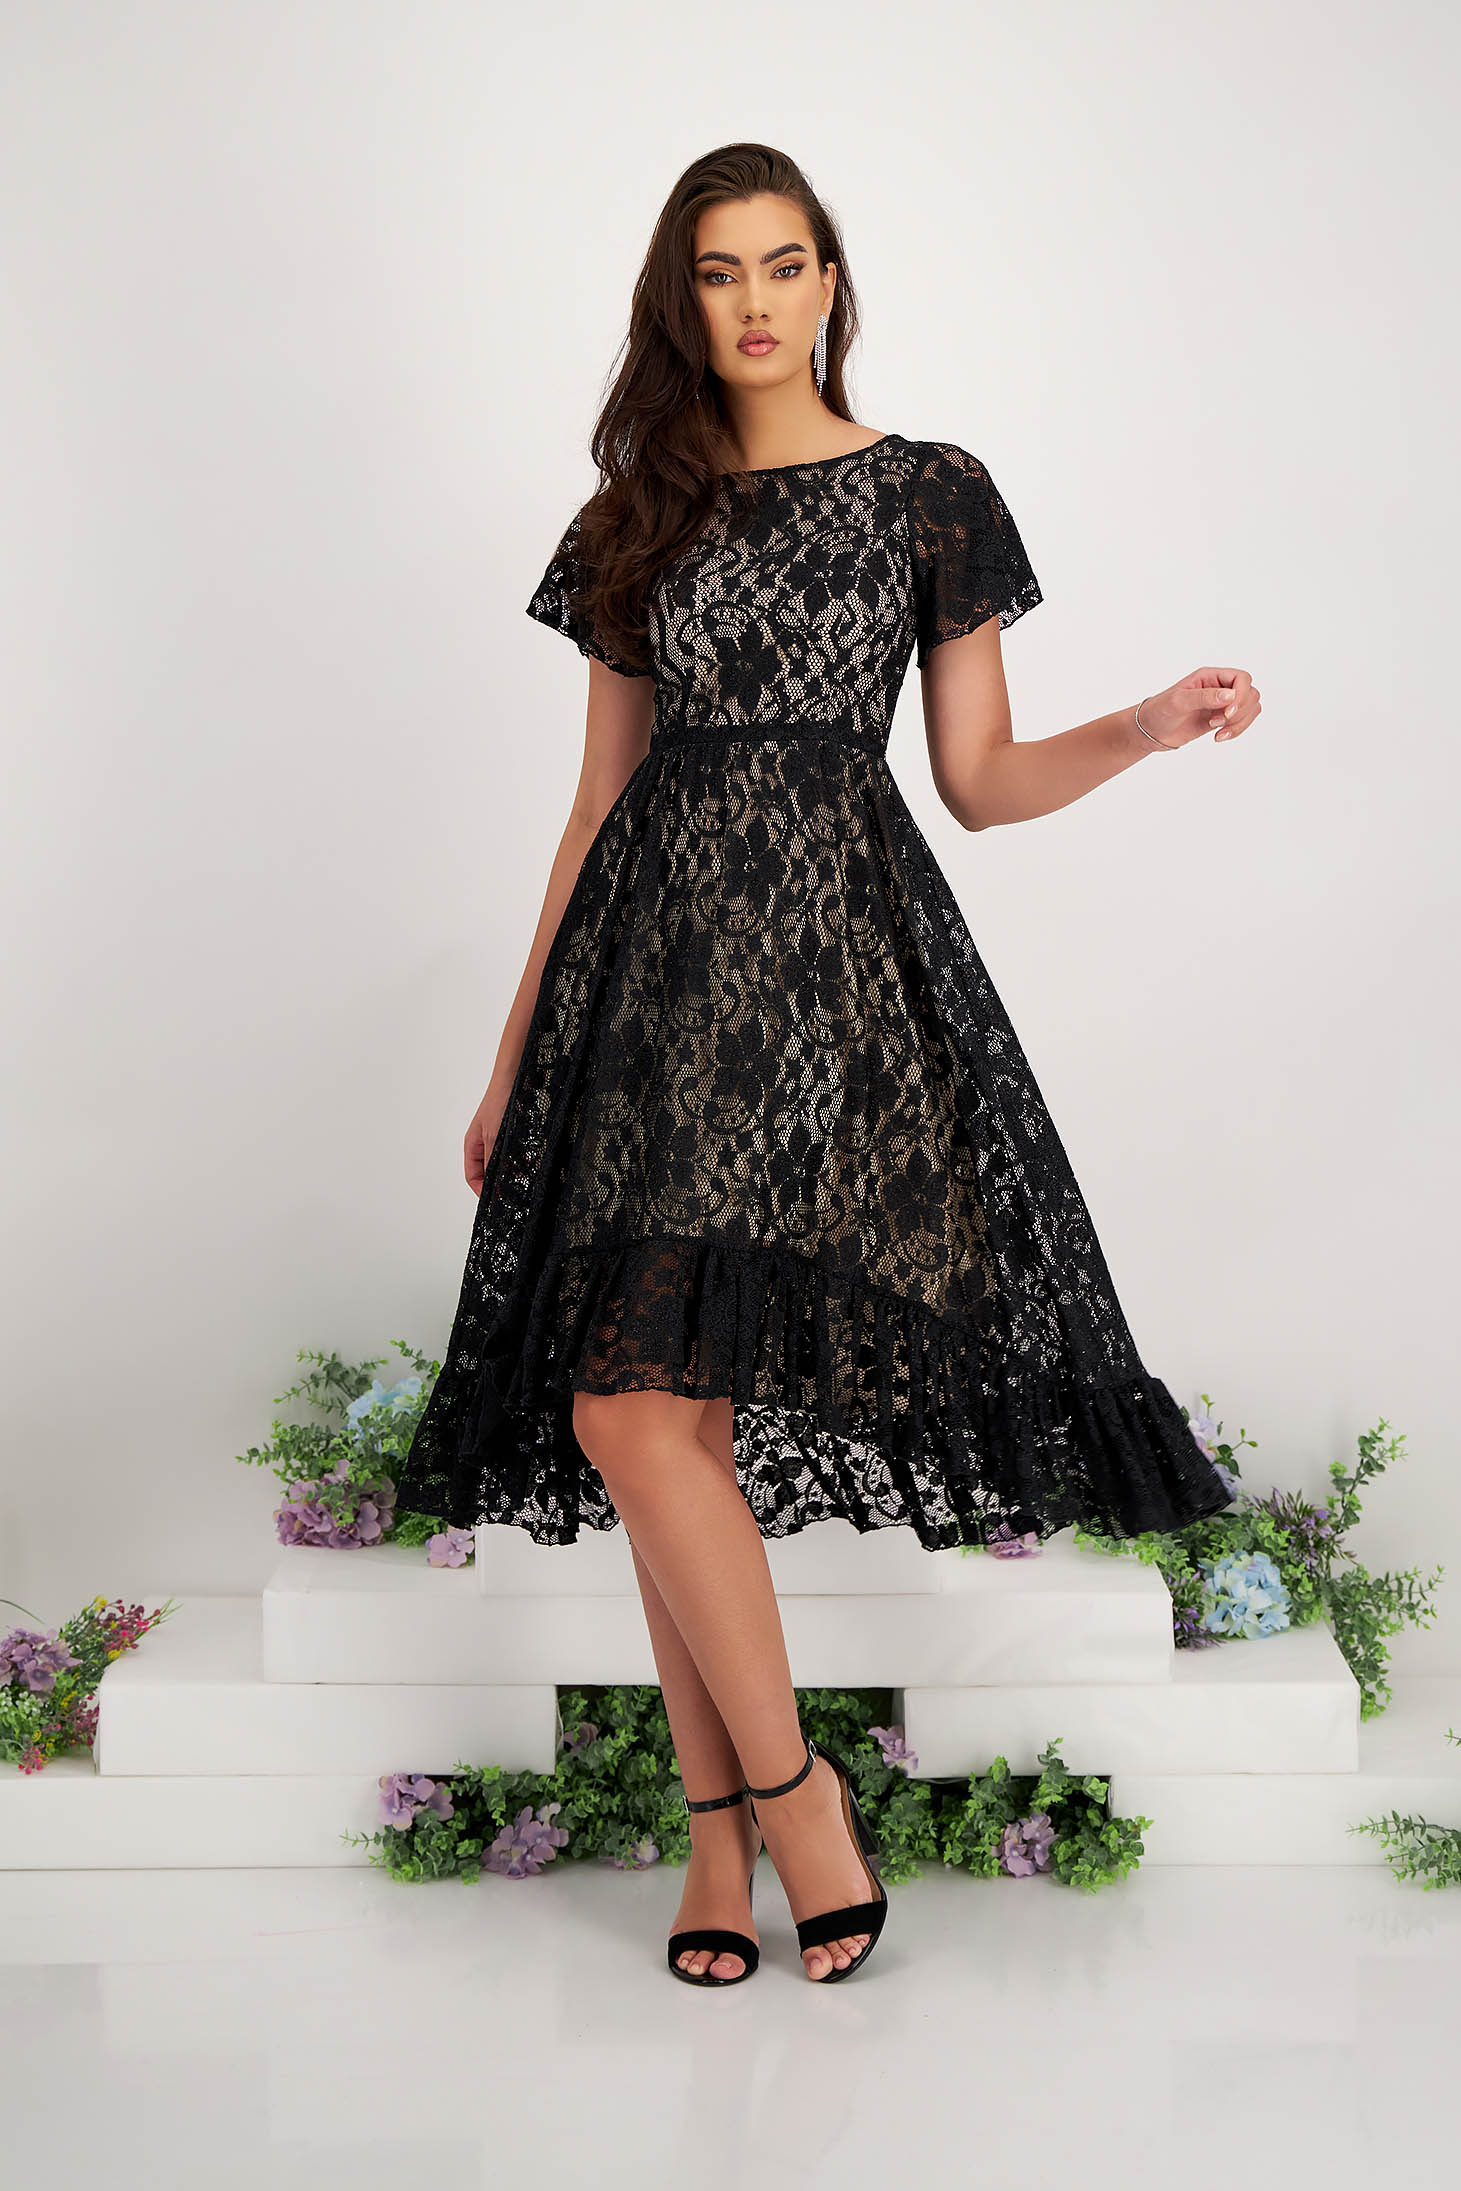 Asymmetrical Black Lace Dress in A-line with Butterfly Sleeves - StarShinerS 3 - StarShinerS.com